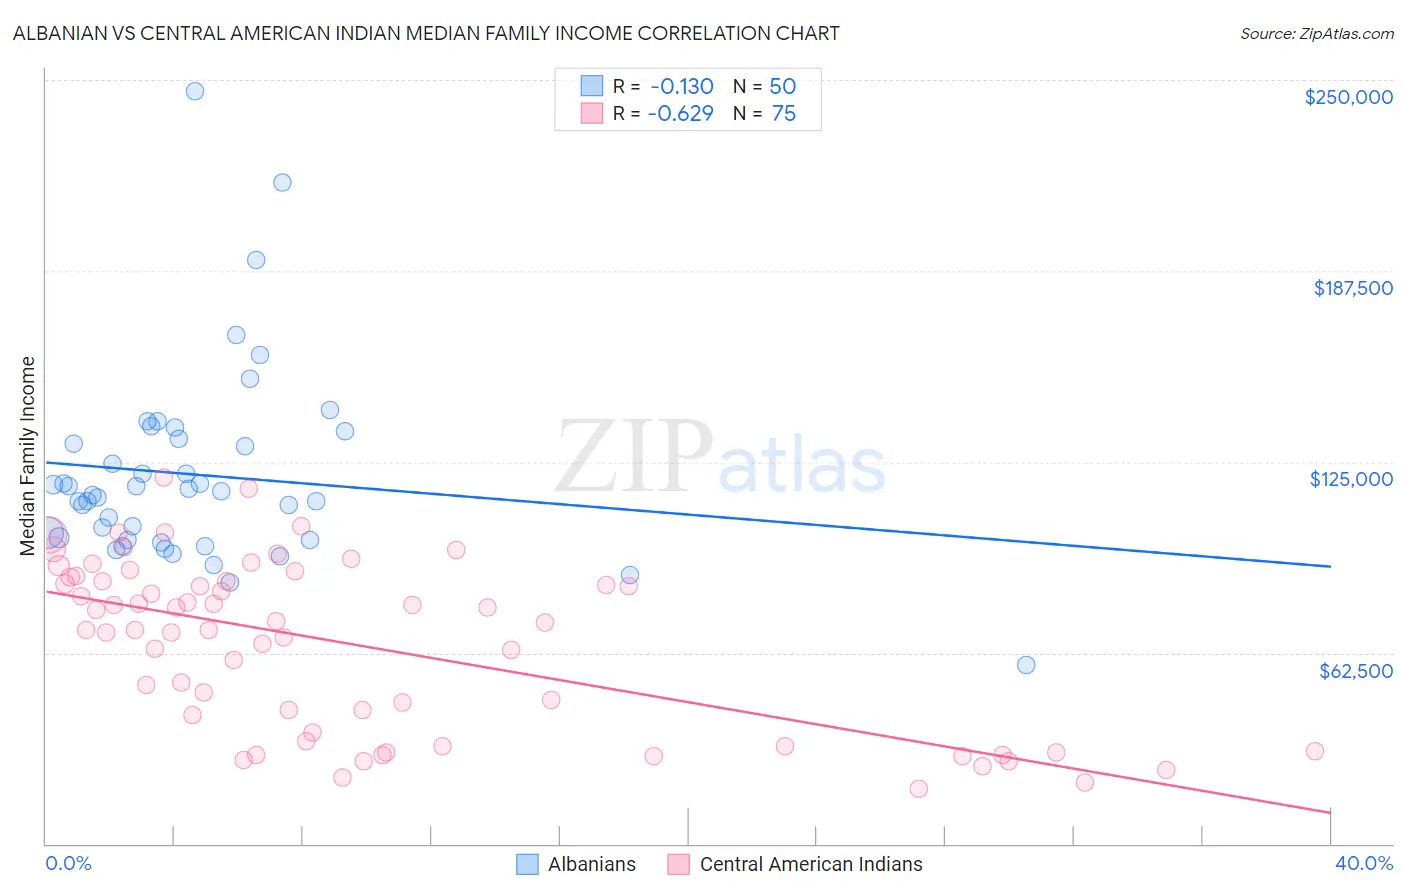 Albanian vs Central American Indian Median Family Income